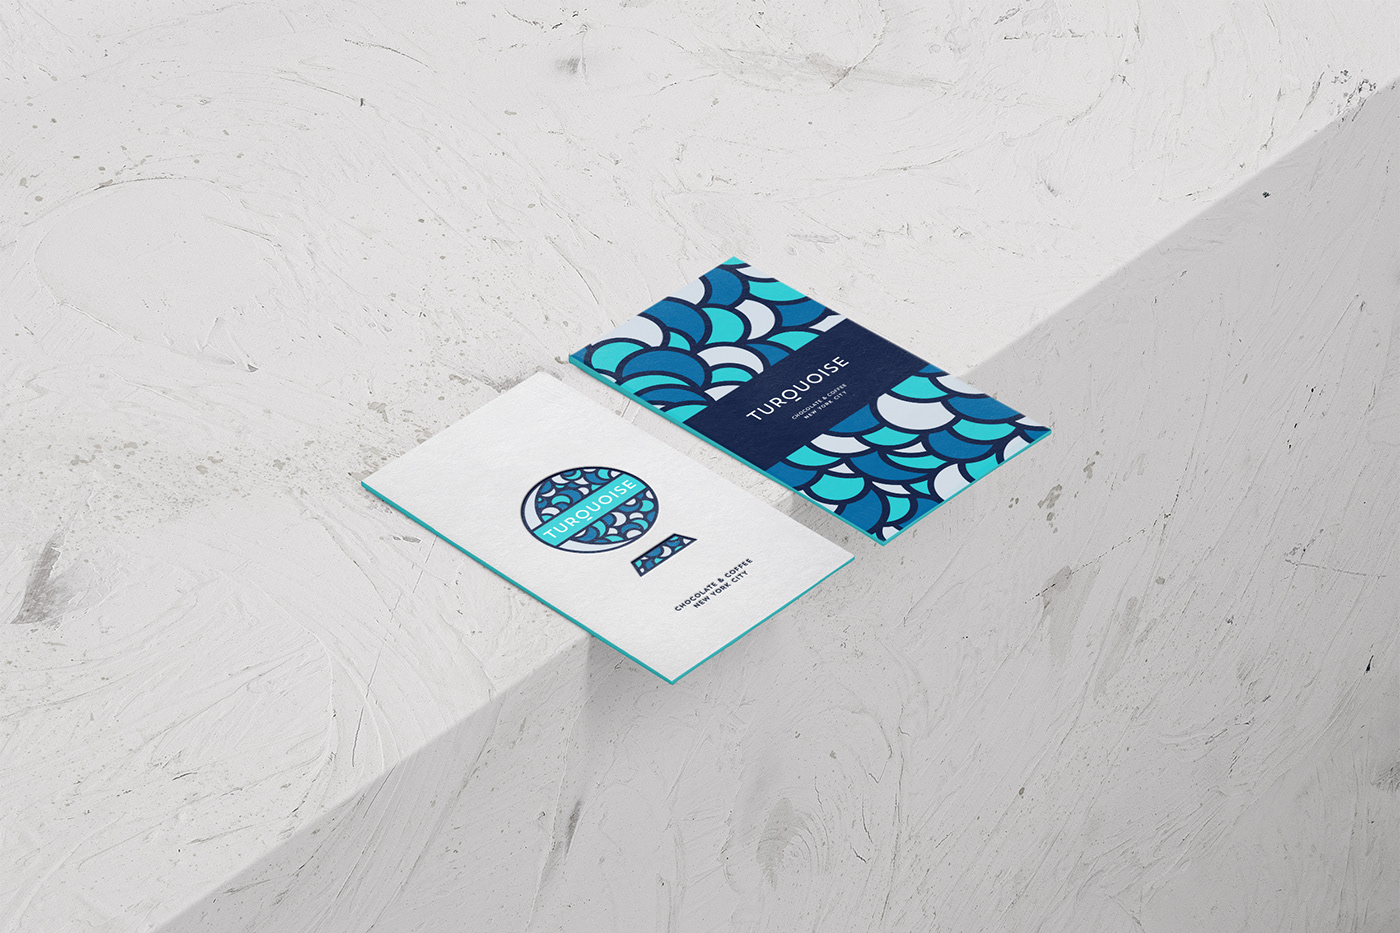 chocolate Coffee brand identity moon turquoise blue circle Packaging